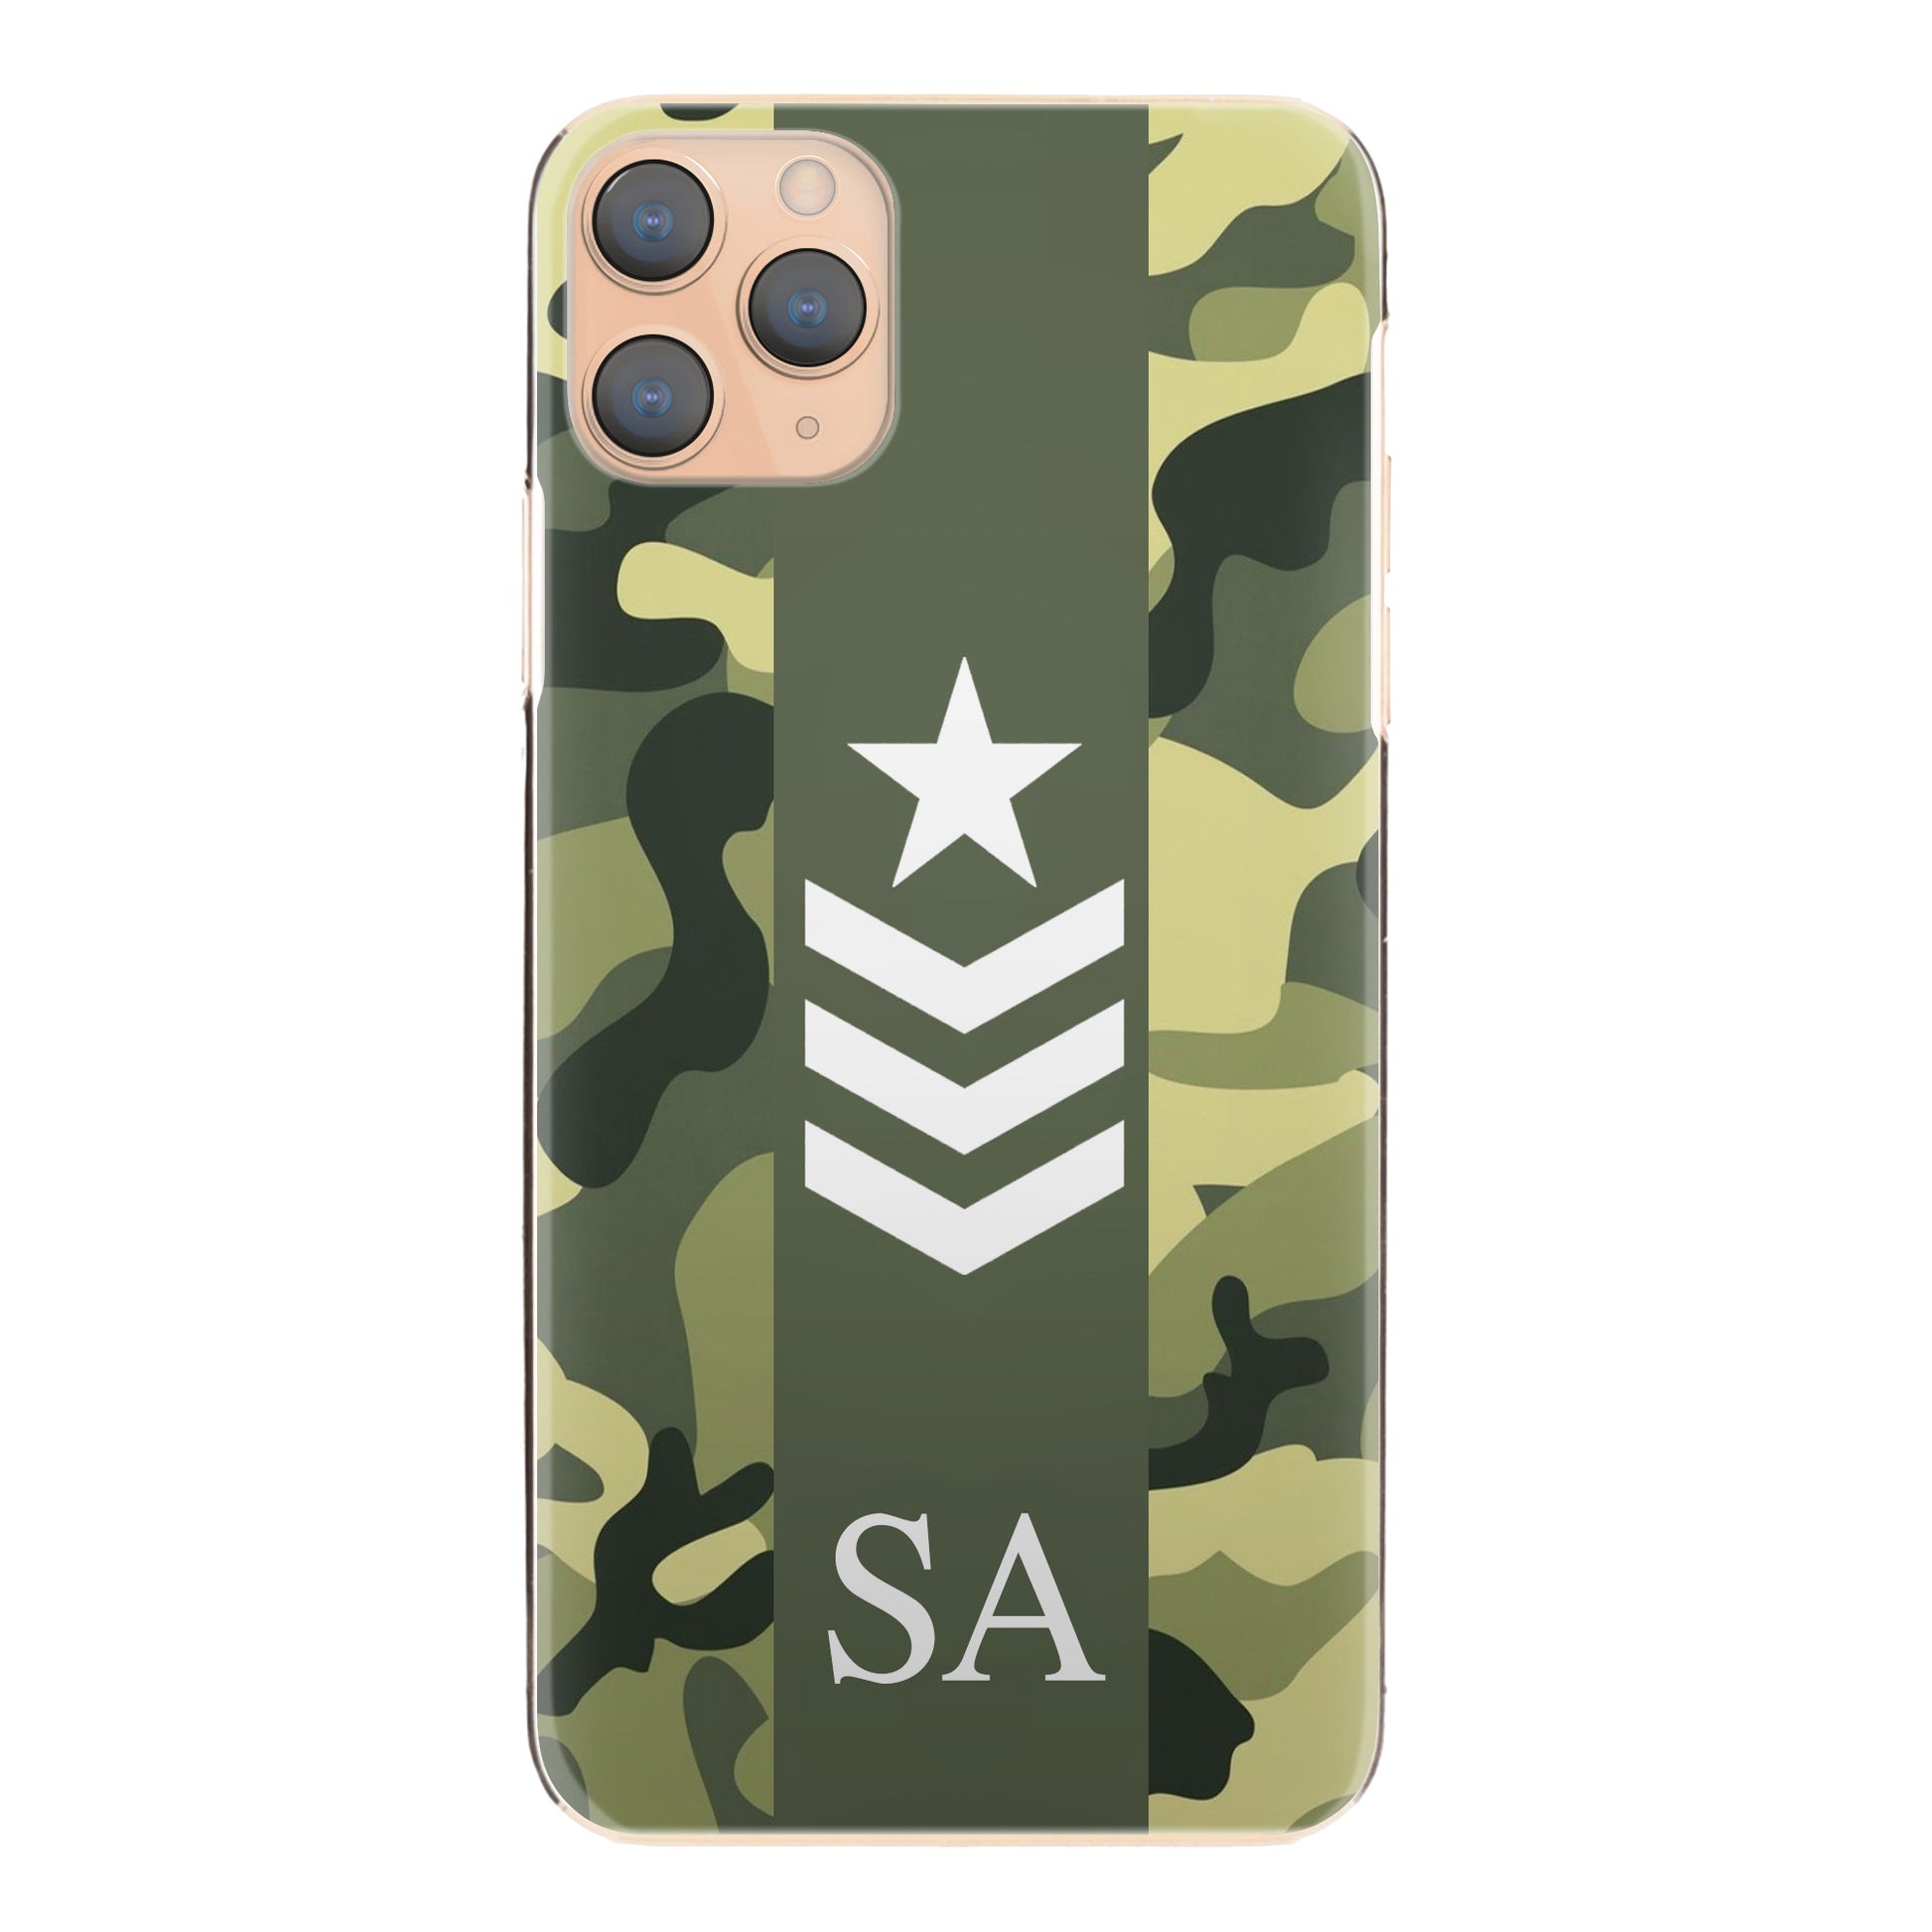 Personalised One Phone Hard Case with Initials and Army Rank on Classic Green Camo